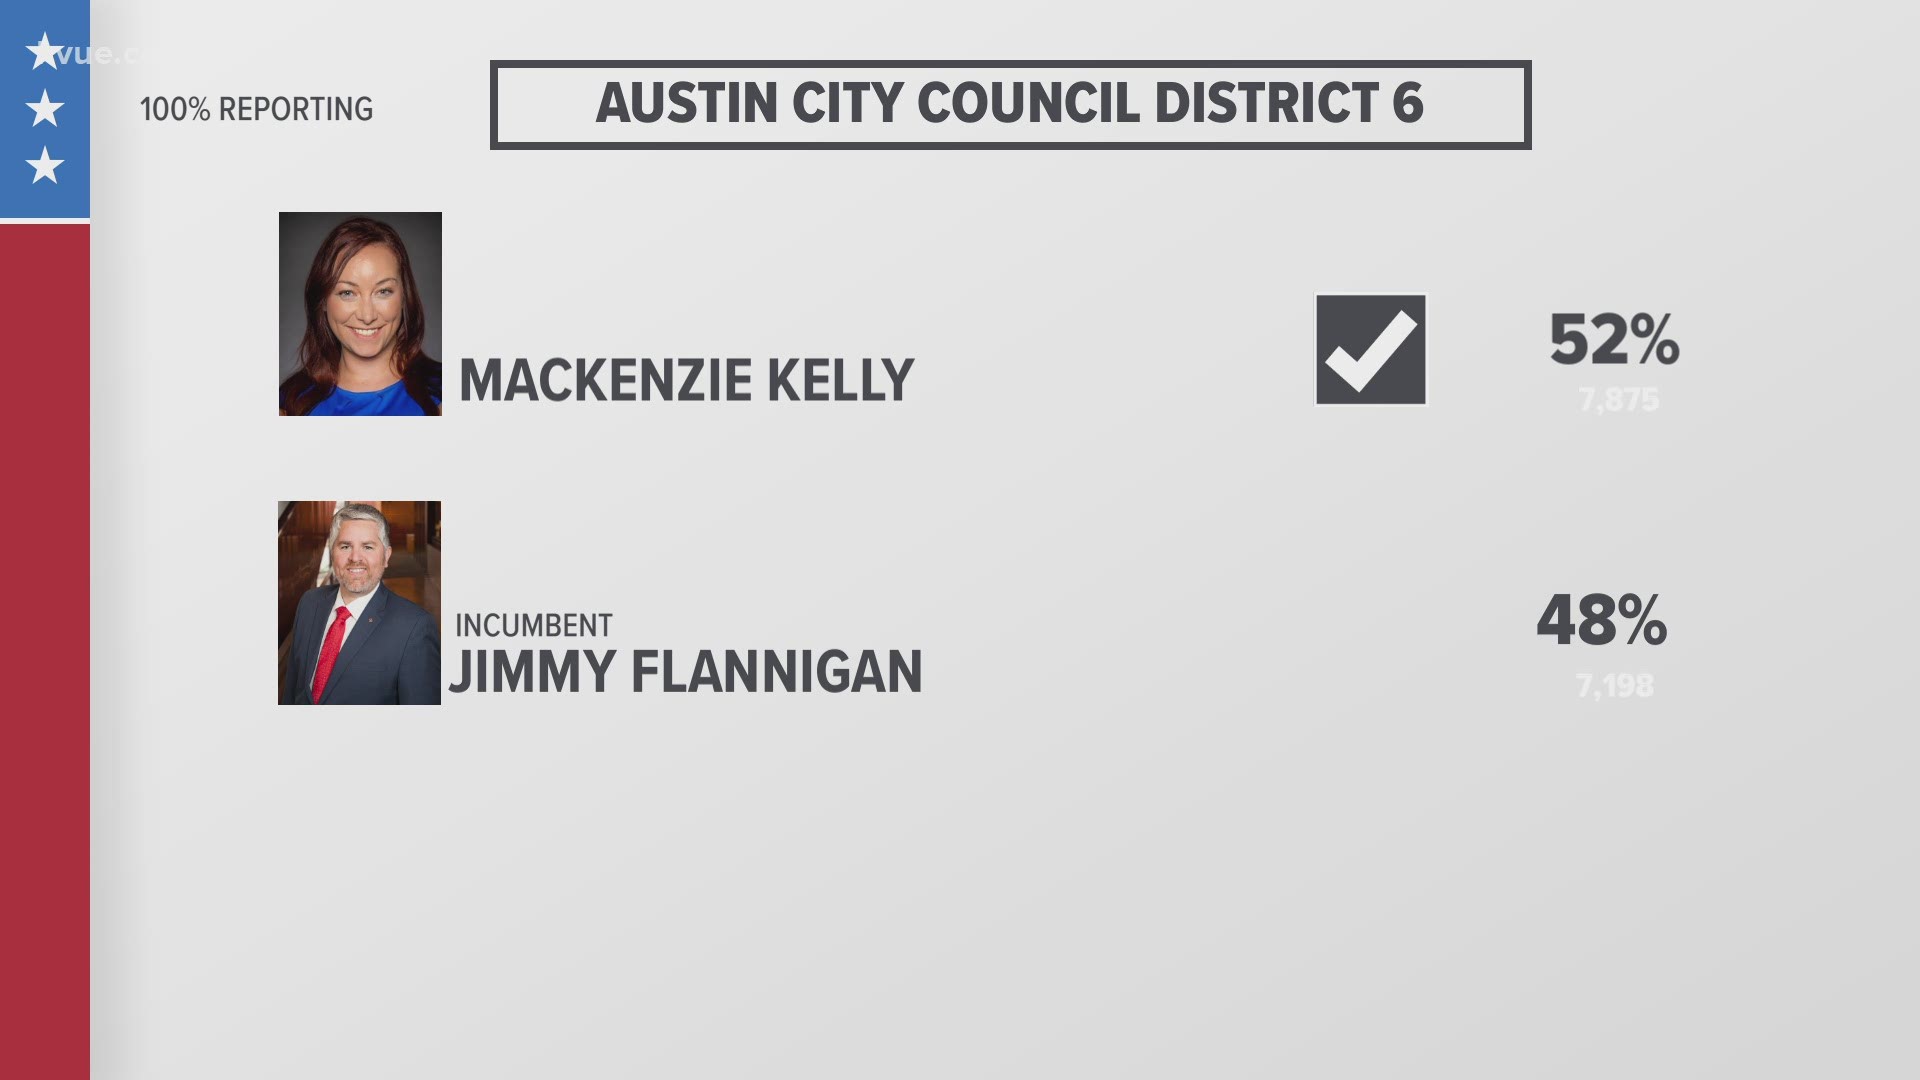 In the Dec. 15 runoff election, voters living in Austin's District 6 chose Mackenzie Kelly to represent them. Voters in District 10 reelected incumbent Alison Alter.